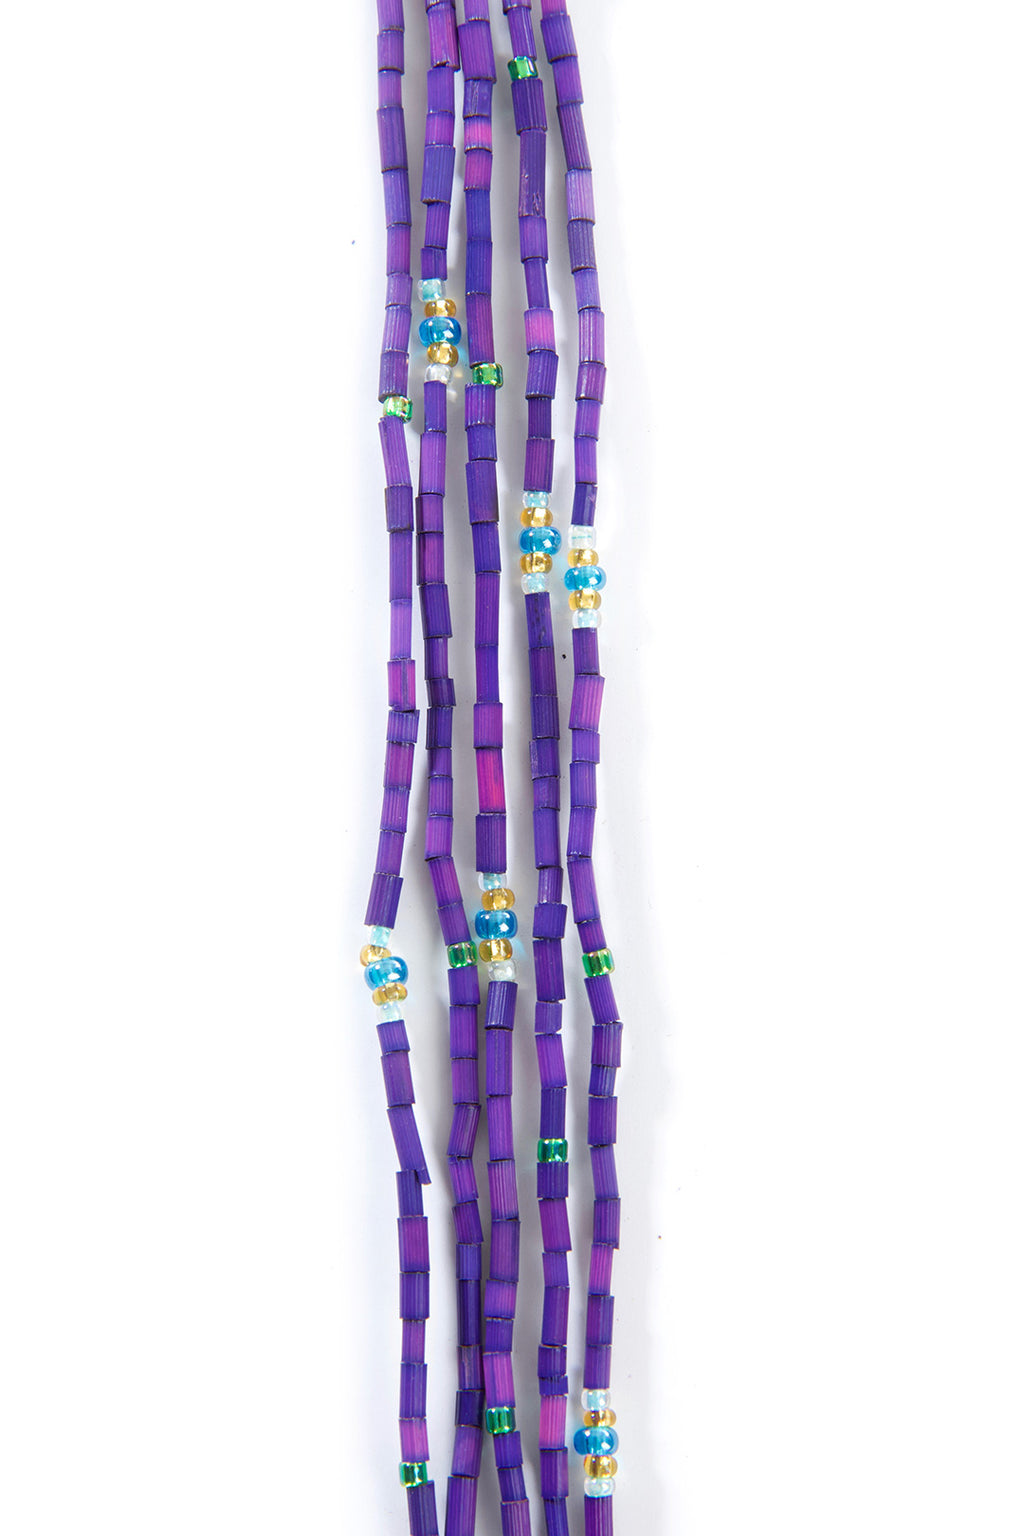 Set/5 Dark Purple 26" Zulugrass Single Strands from The Leakey Collection Default Title